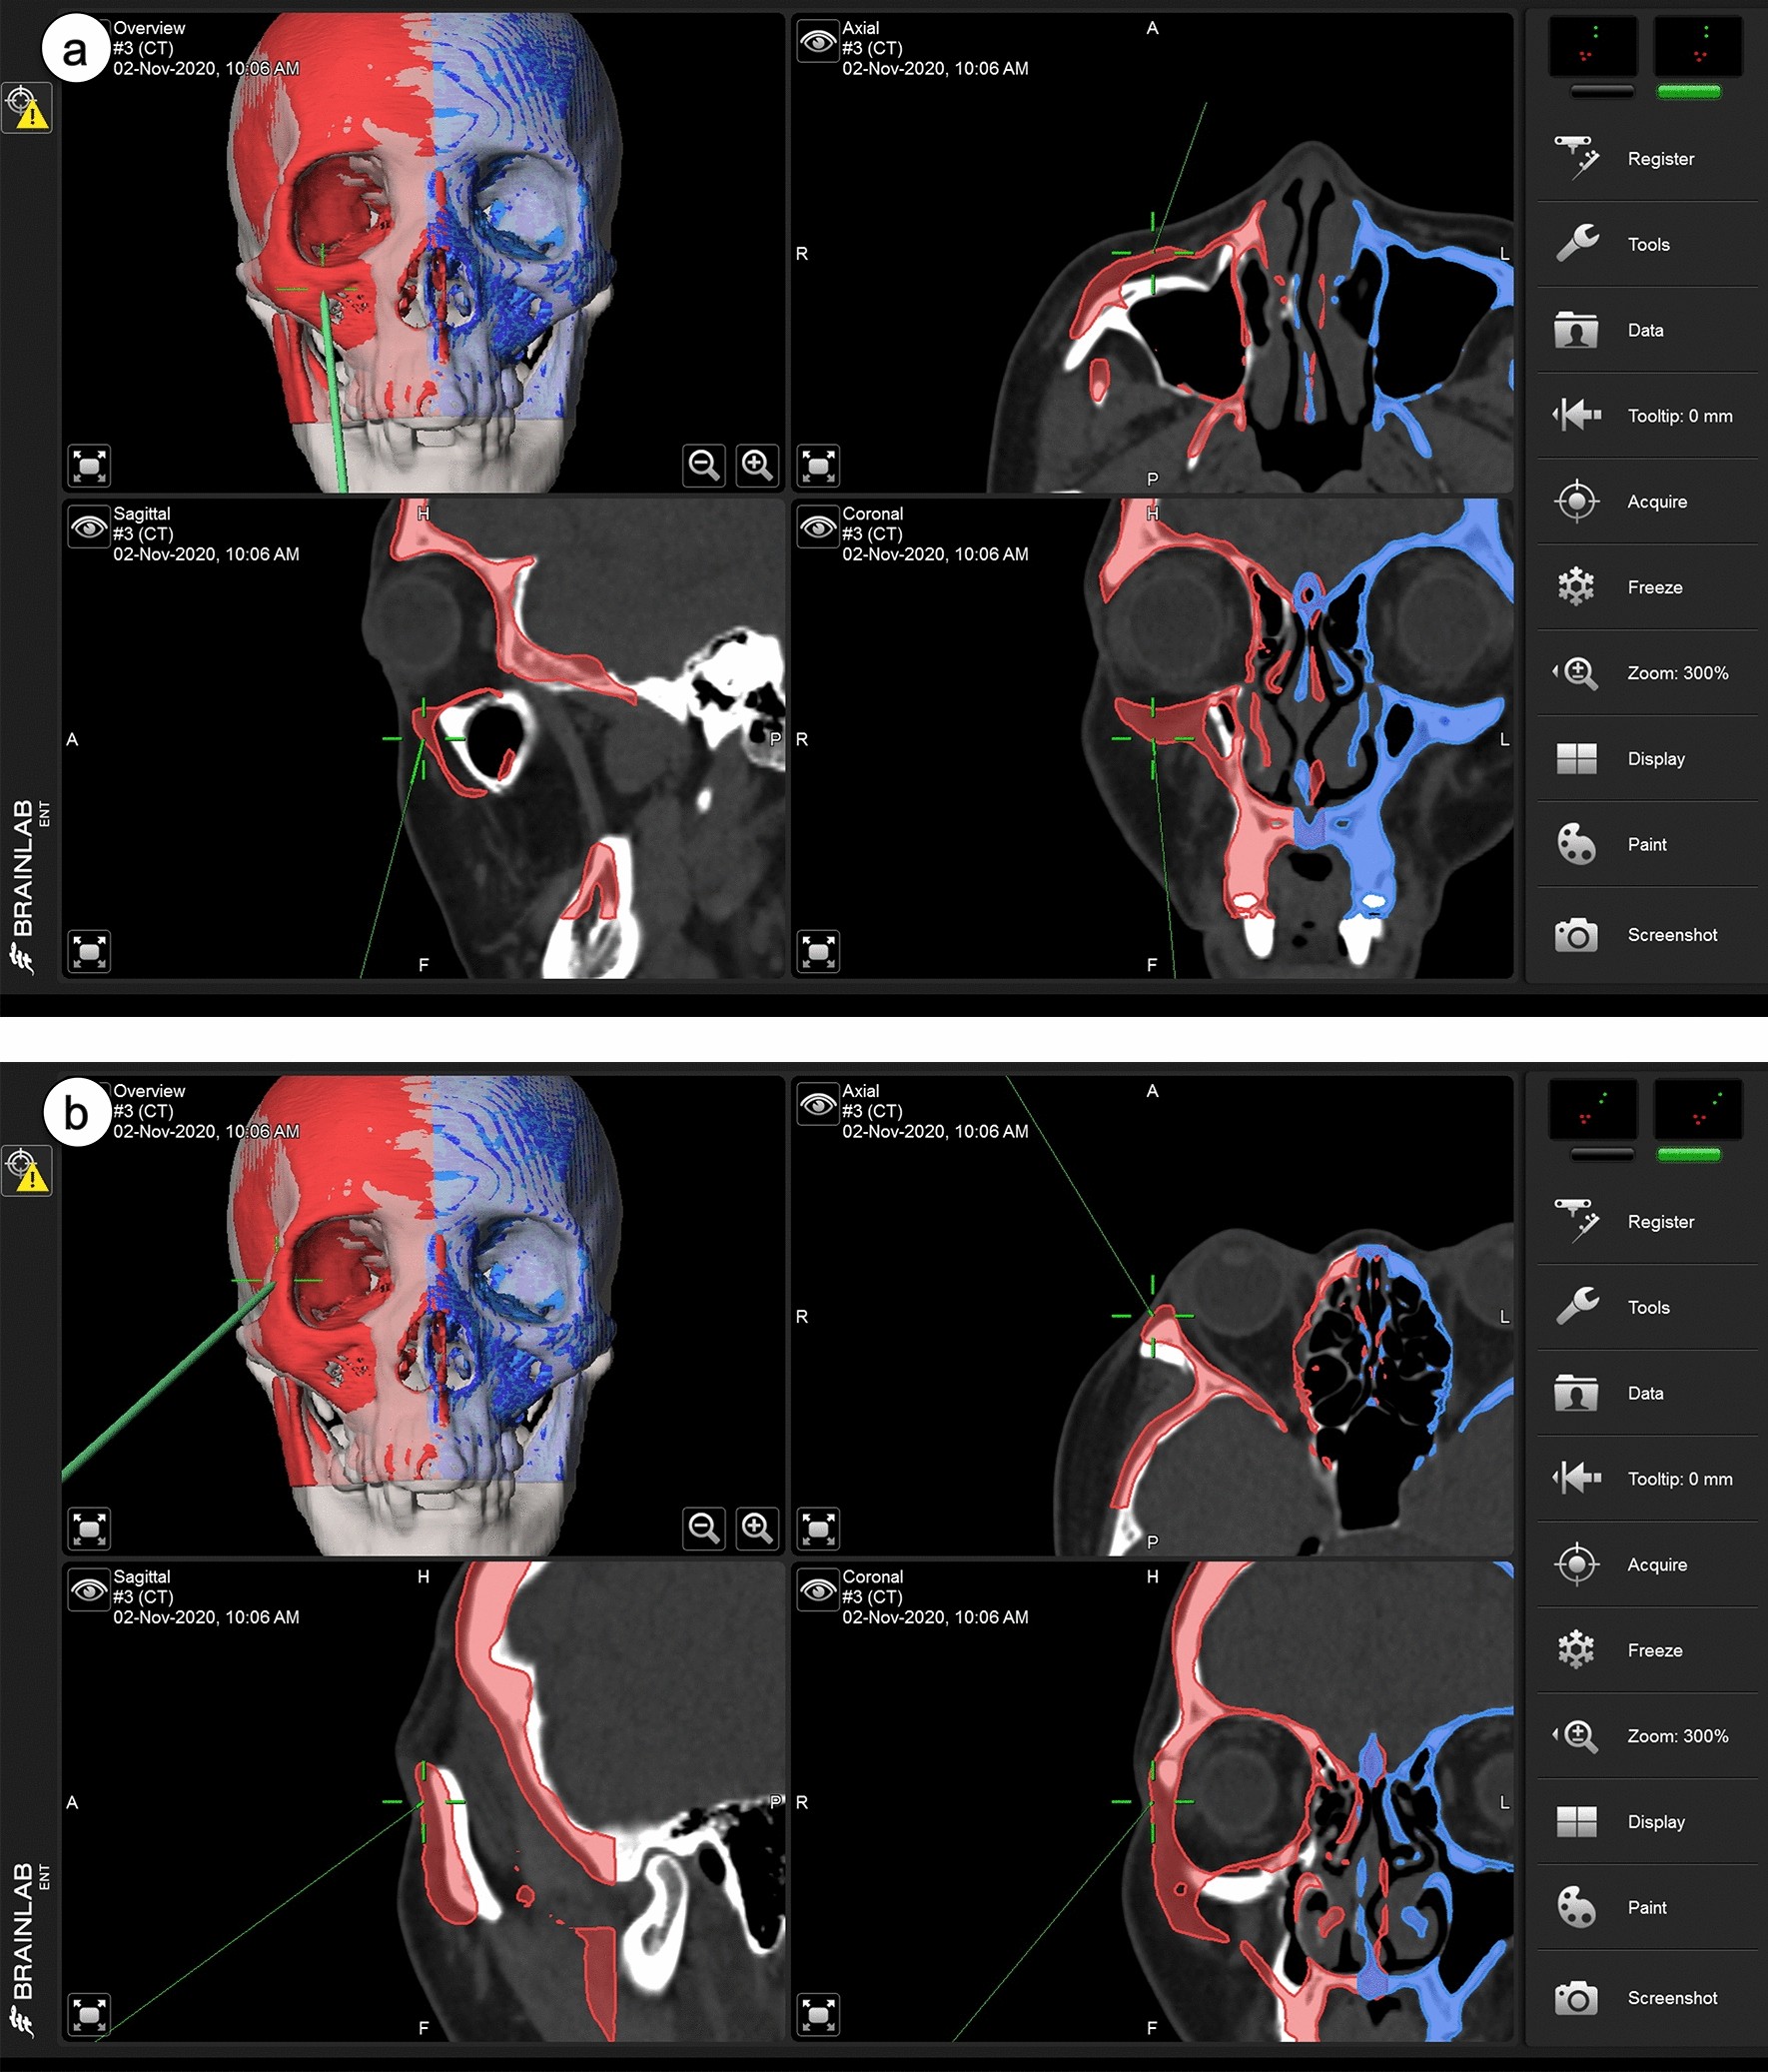 Preliminary outcomes of the surgical navigation system combined with intraoperative three-dimensional C-arm computed tomography for zygomatico-orbital fracture reconstruction | Scientific Reports